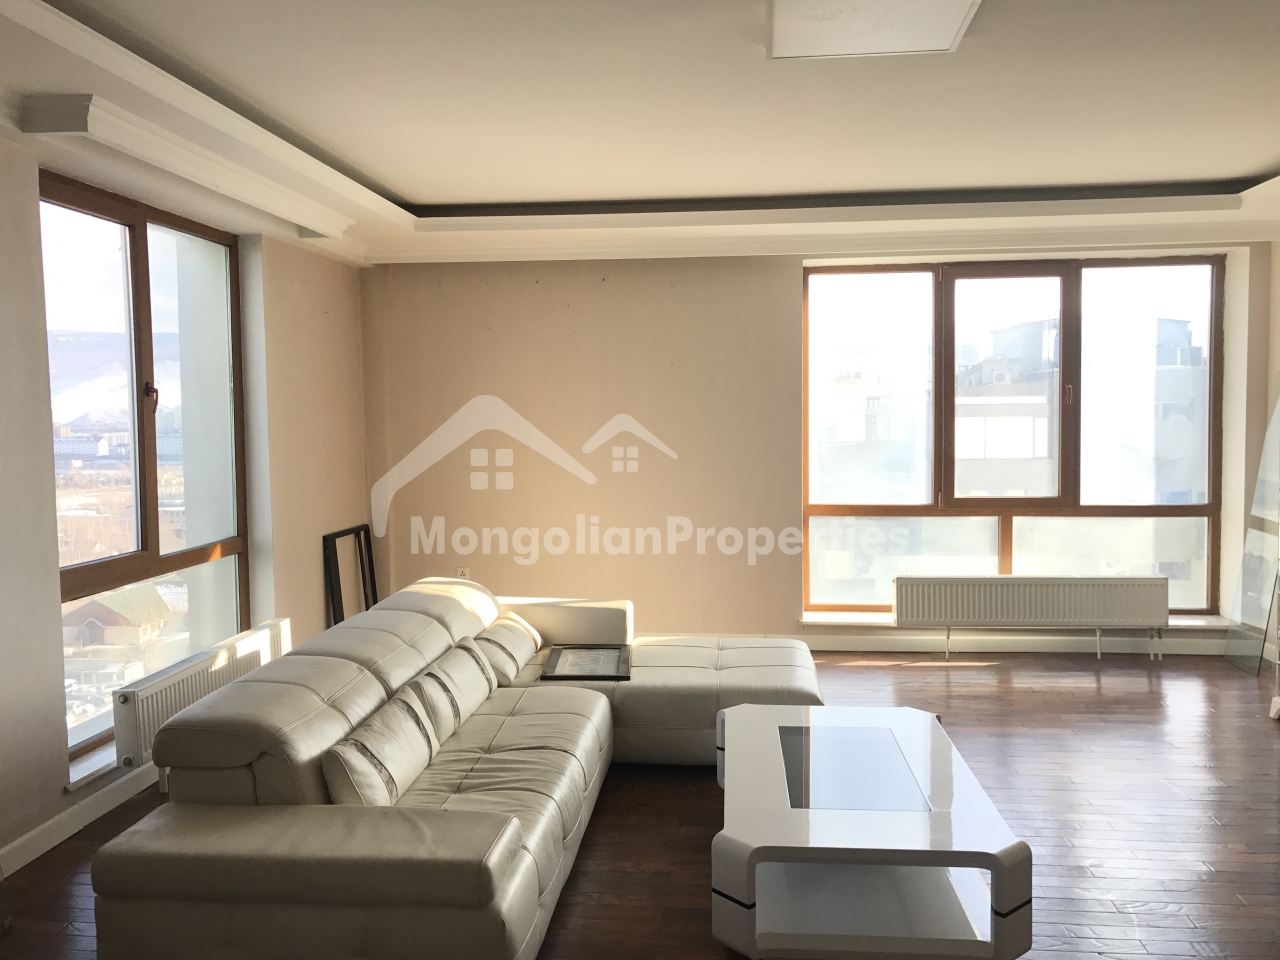 For SALE: Elit Apartments, Central, 192m2, 2 bedroom, 1 office, 2 bath apartment with 1 garage and windows facing south, east and west